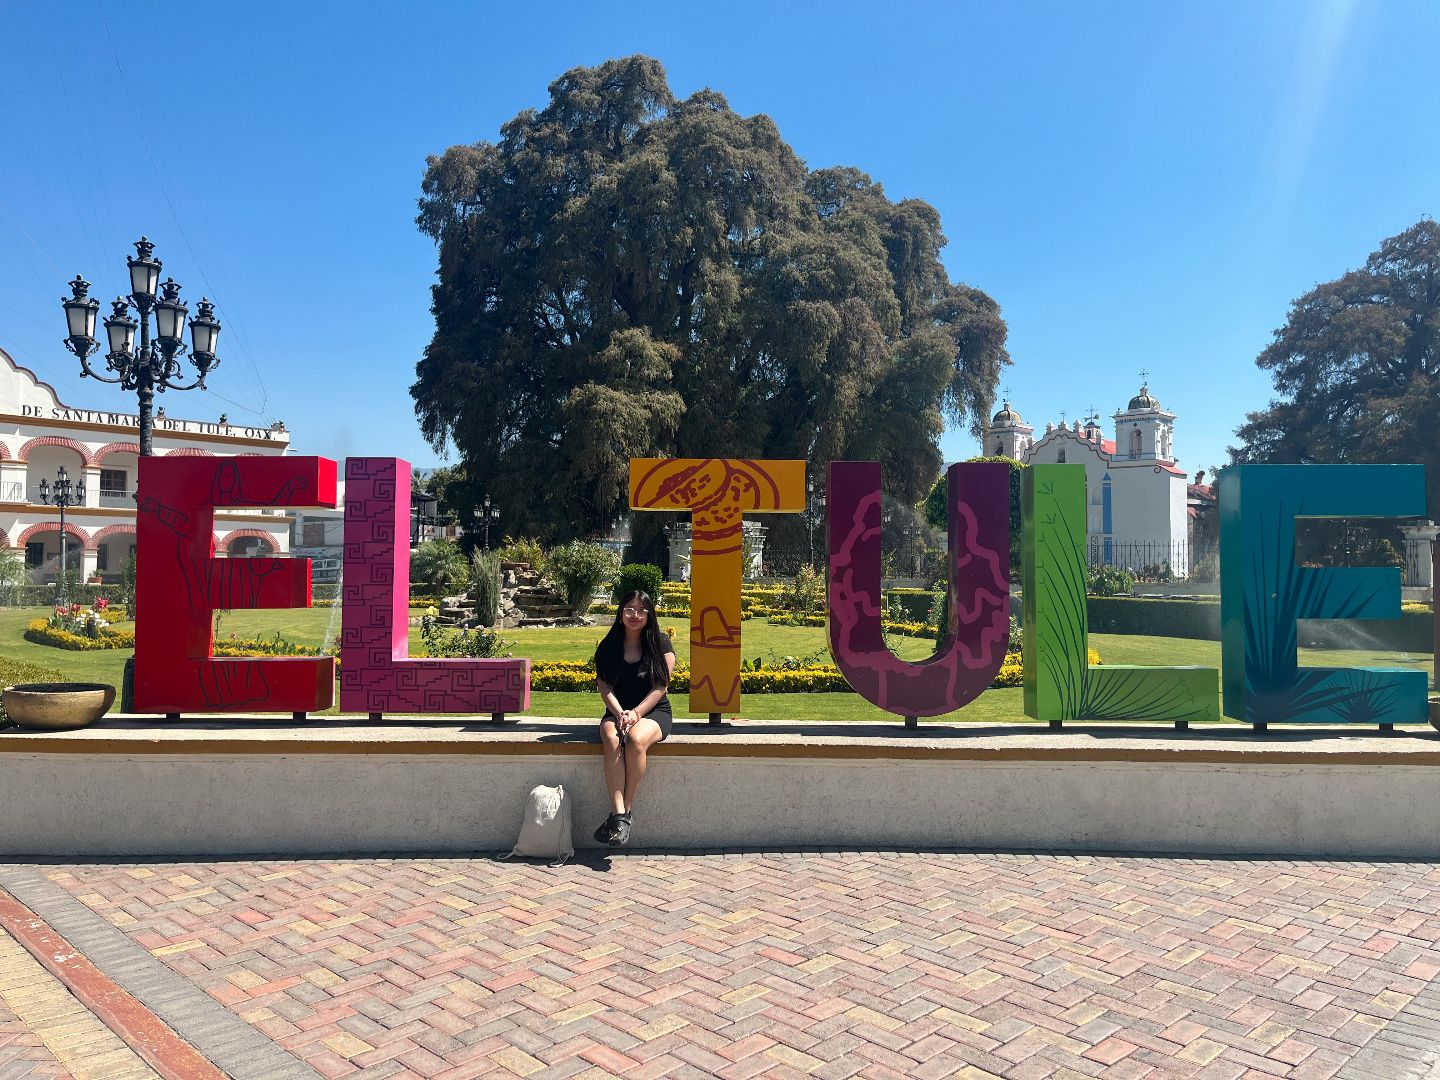 Jennifer sitting in front of a colorful El Tule sign in Mexico